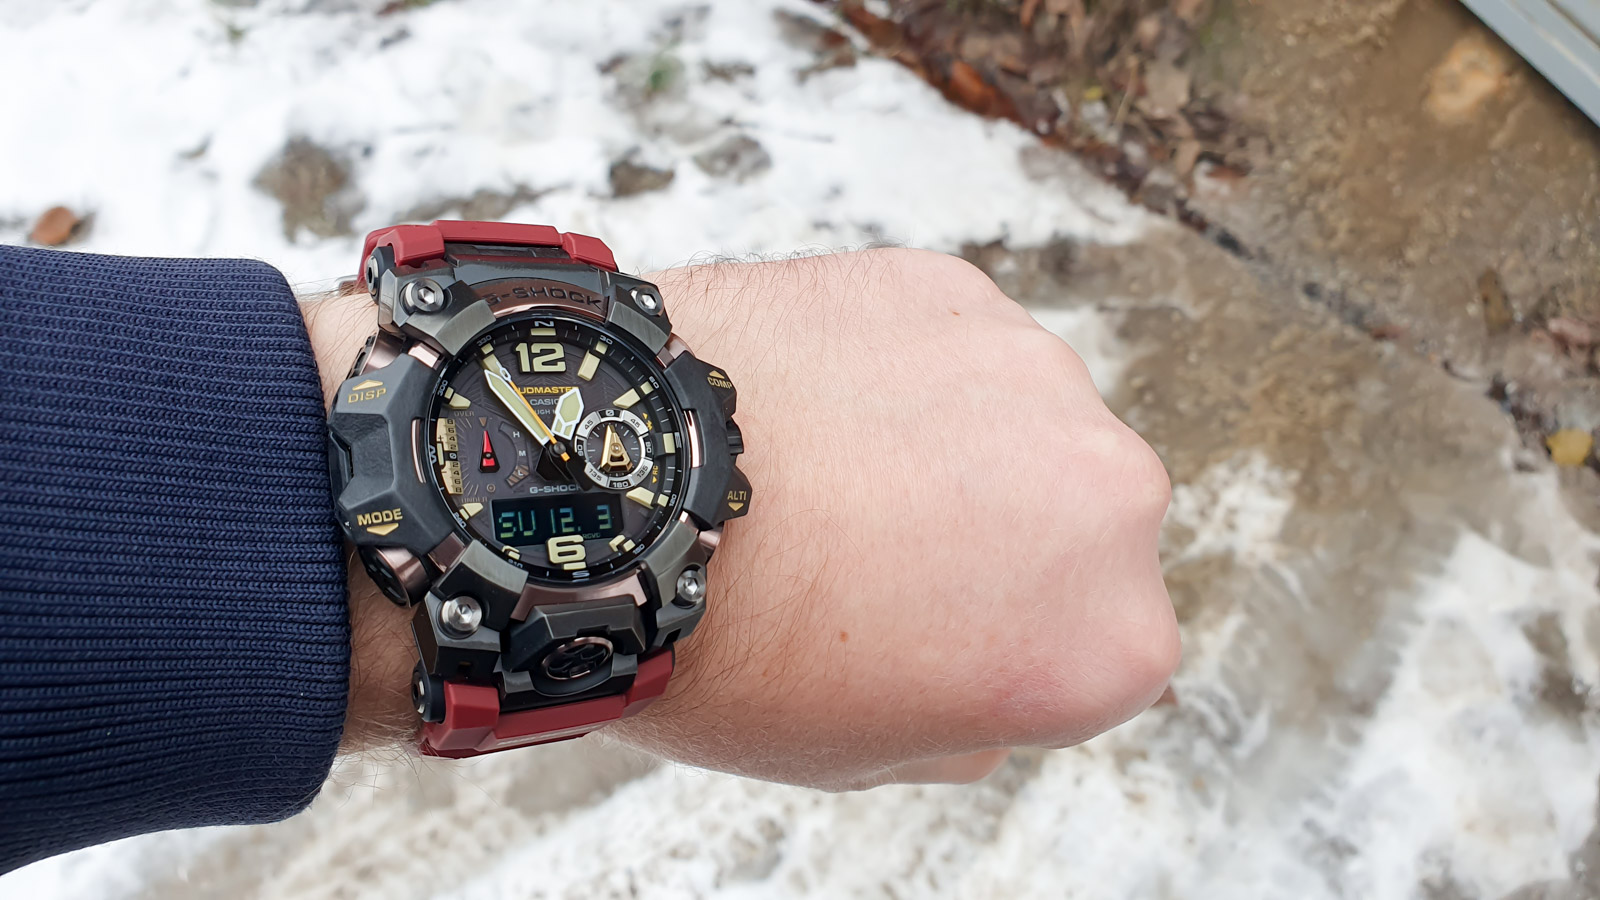 [G-SHOCK Review] GWG-B1000-1A4 — FULL PACK for survival and staying fashionable